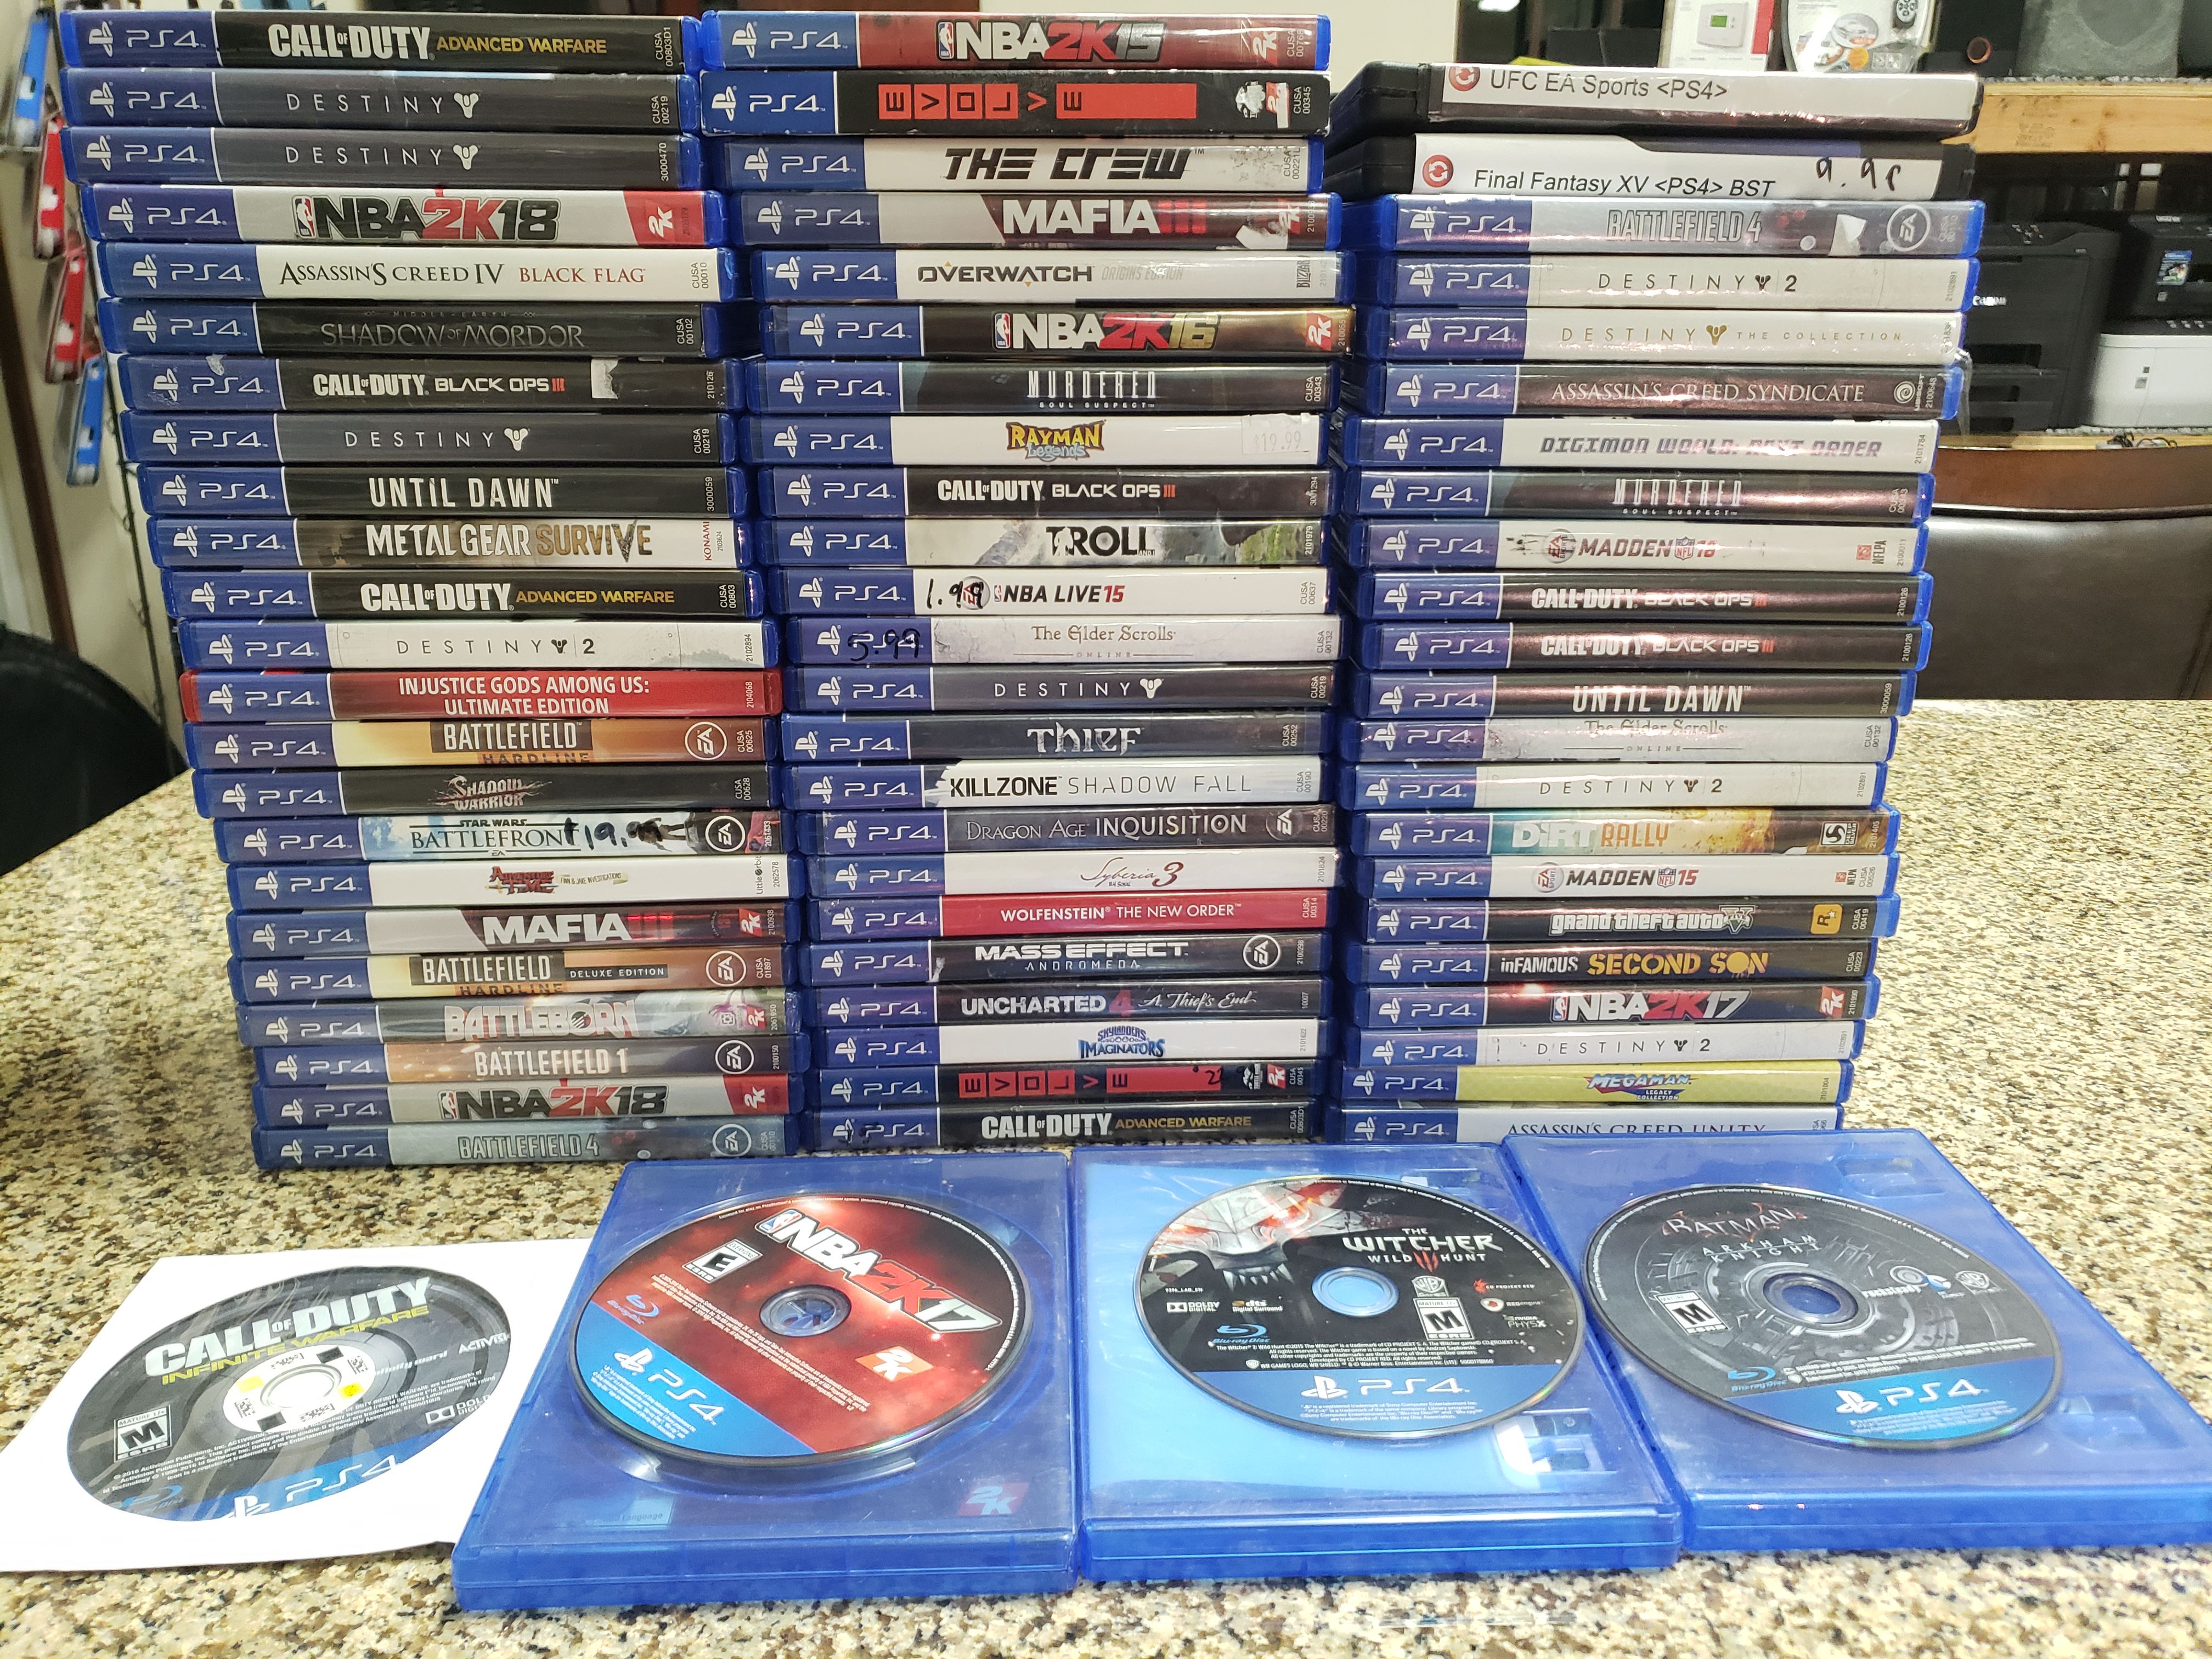 Fifa 23 Ps4 Game for Sale in Lacey, WA - OfferUp